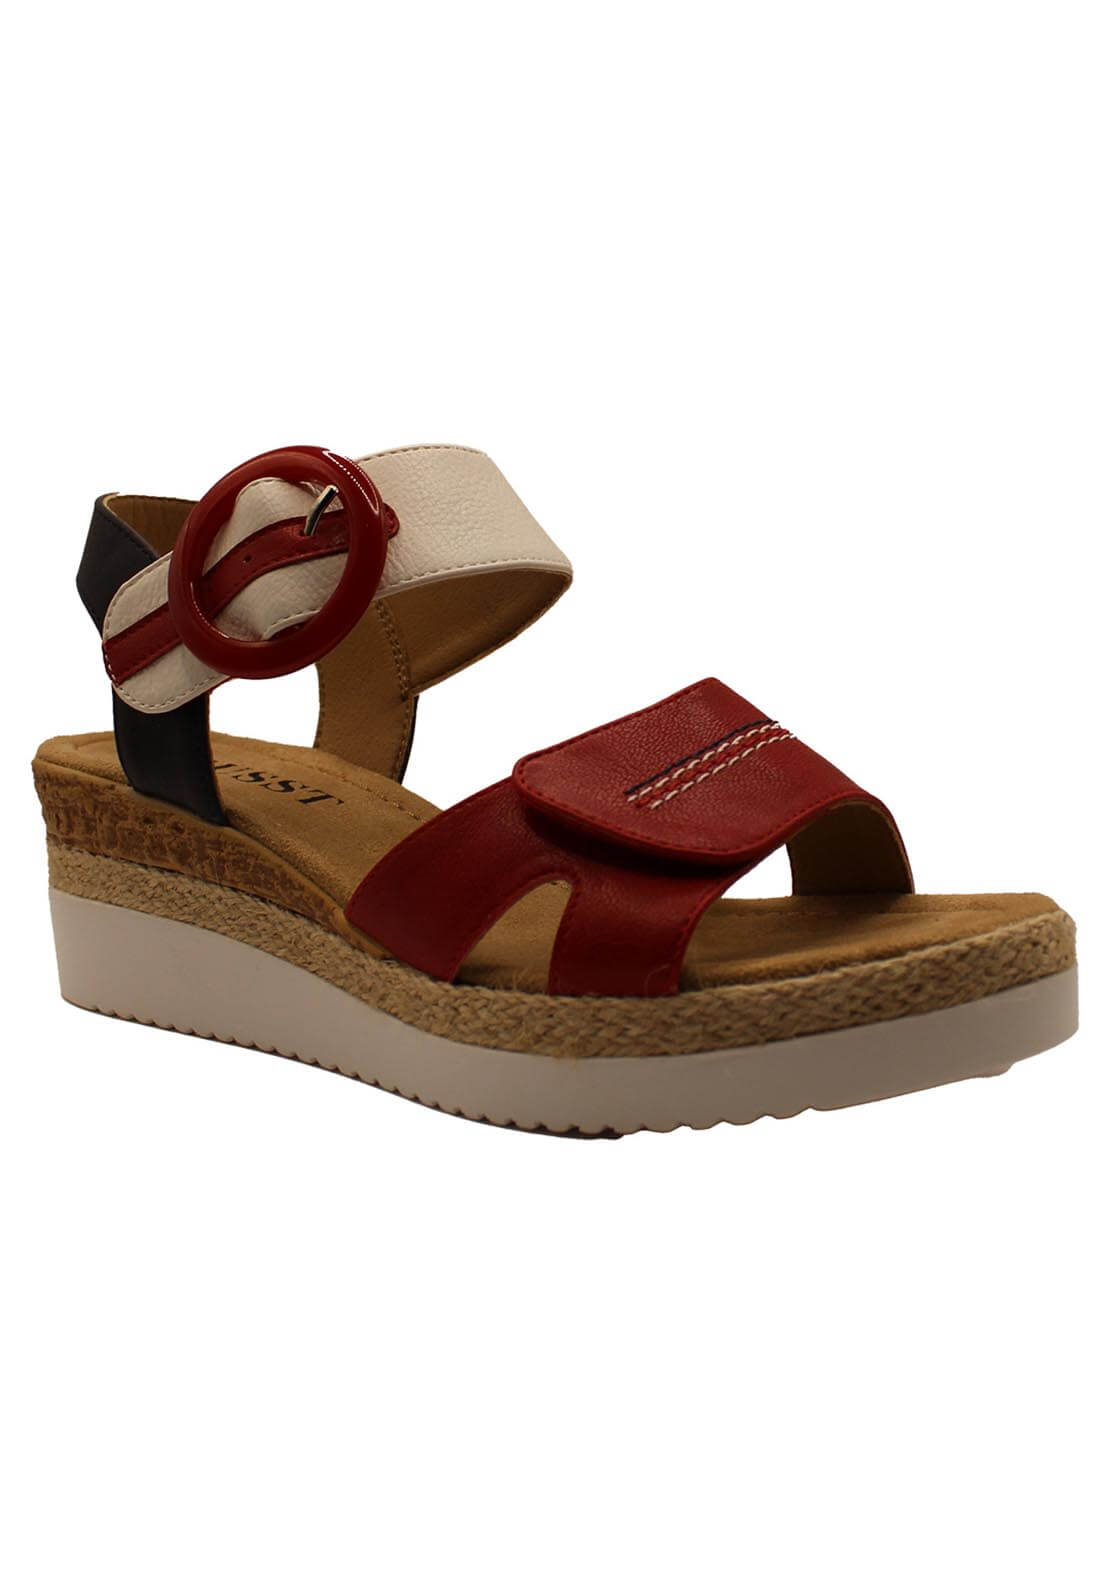 Susst Hessian Trim Wedge Sandal with Twin Velcro Straps - Red 1 Shaws Department Stores